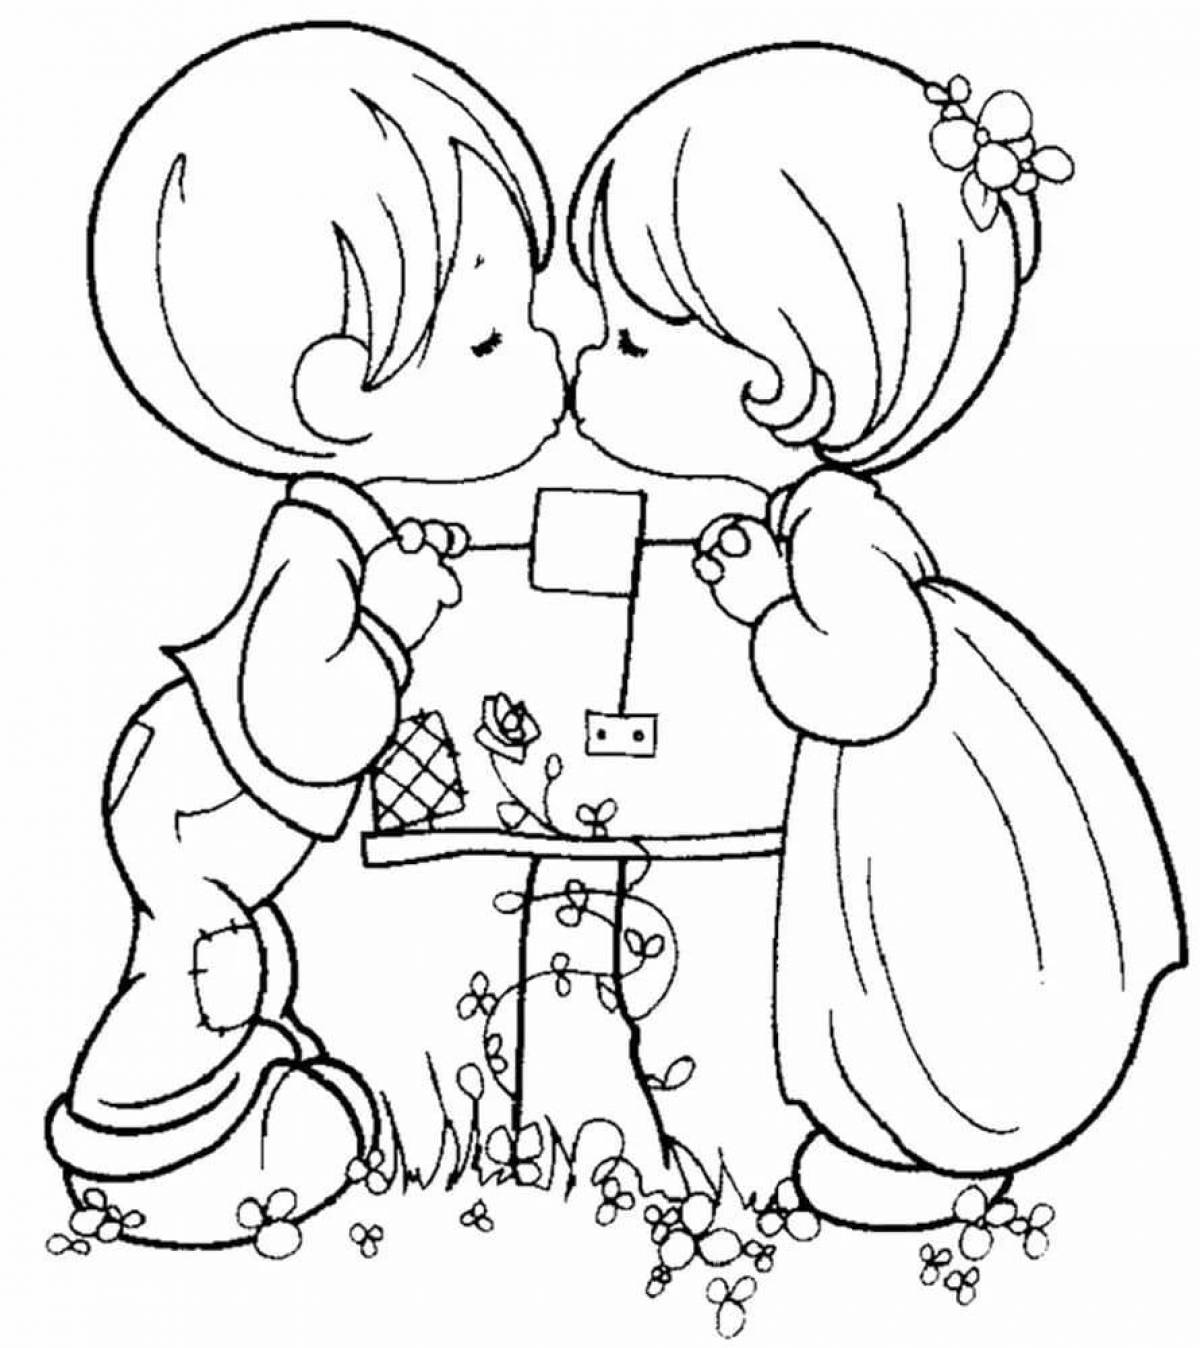 Sparkly love coloring page